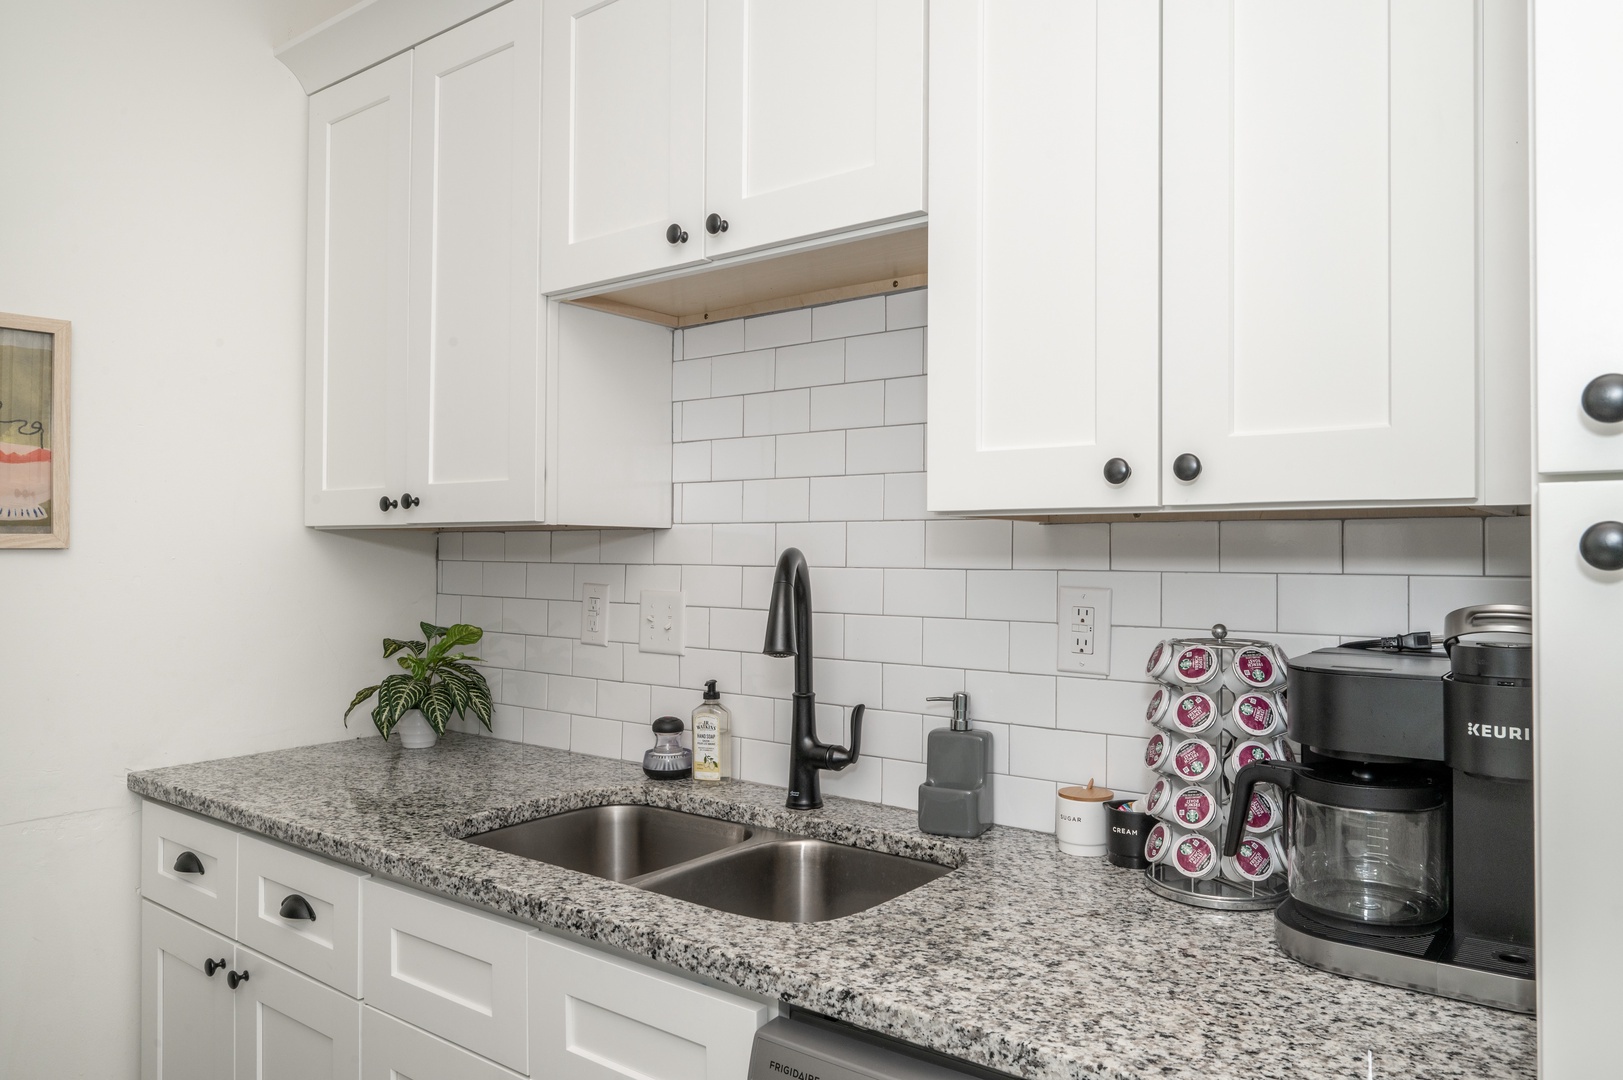 Apt 2 – The modern kitchen offers ample storage & all the comforts of home